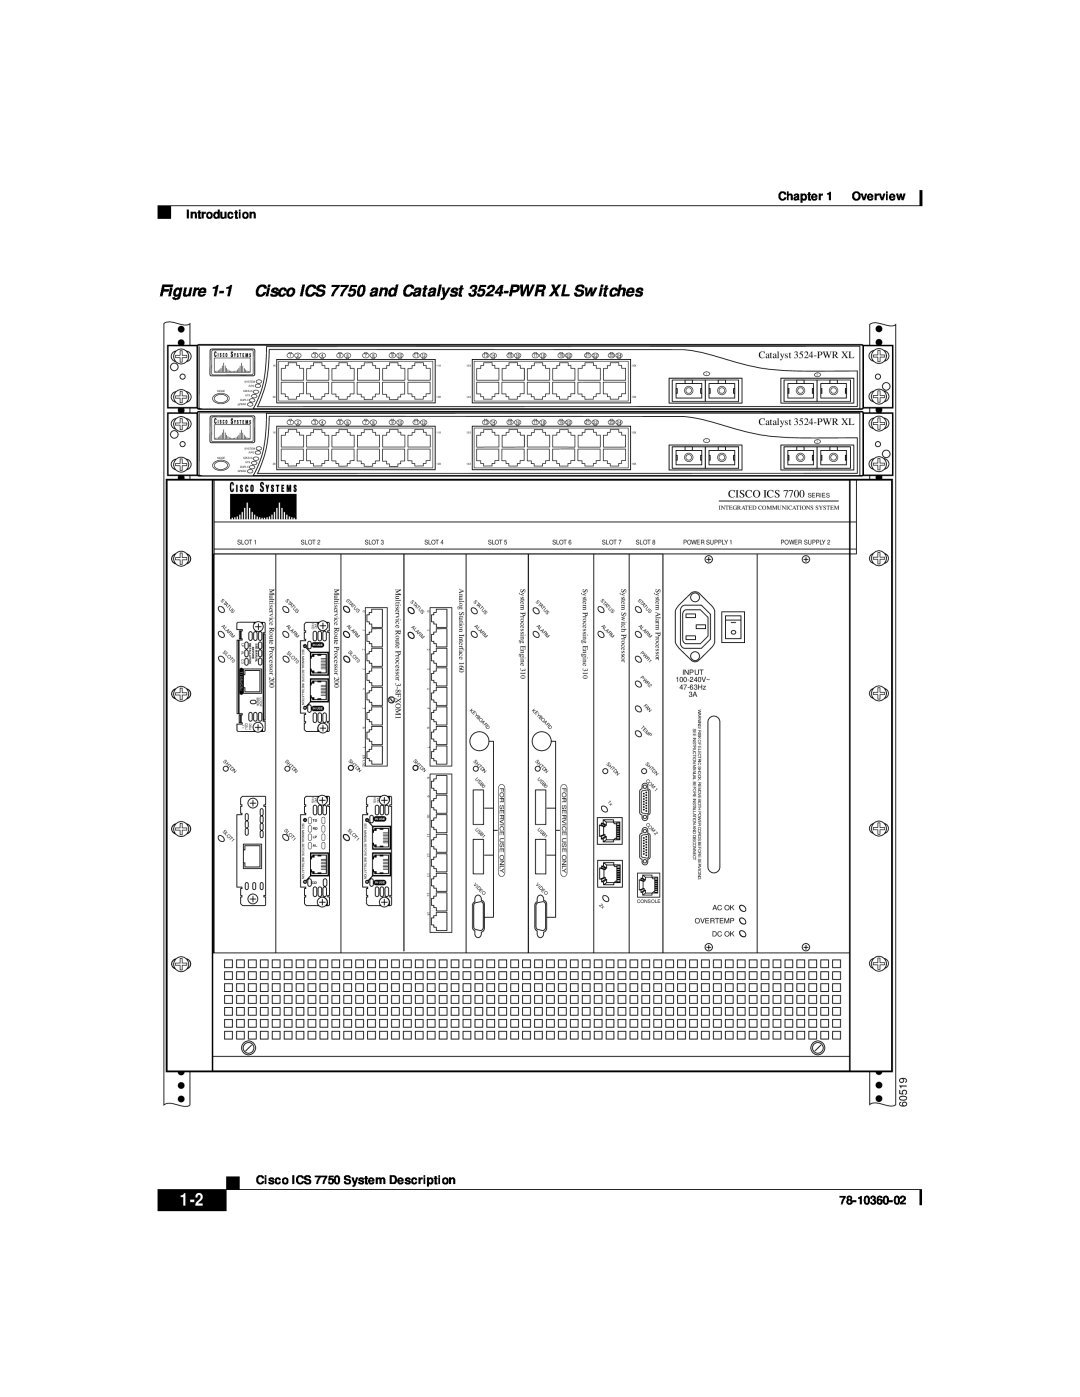 Cisco Systems ICS-7750 manual 1 Cisco ICS 7750 and Catalyst 3524-PWR XL Switches, Overview Introduction, 78-10360-02, 60519 